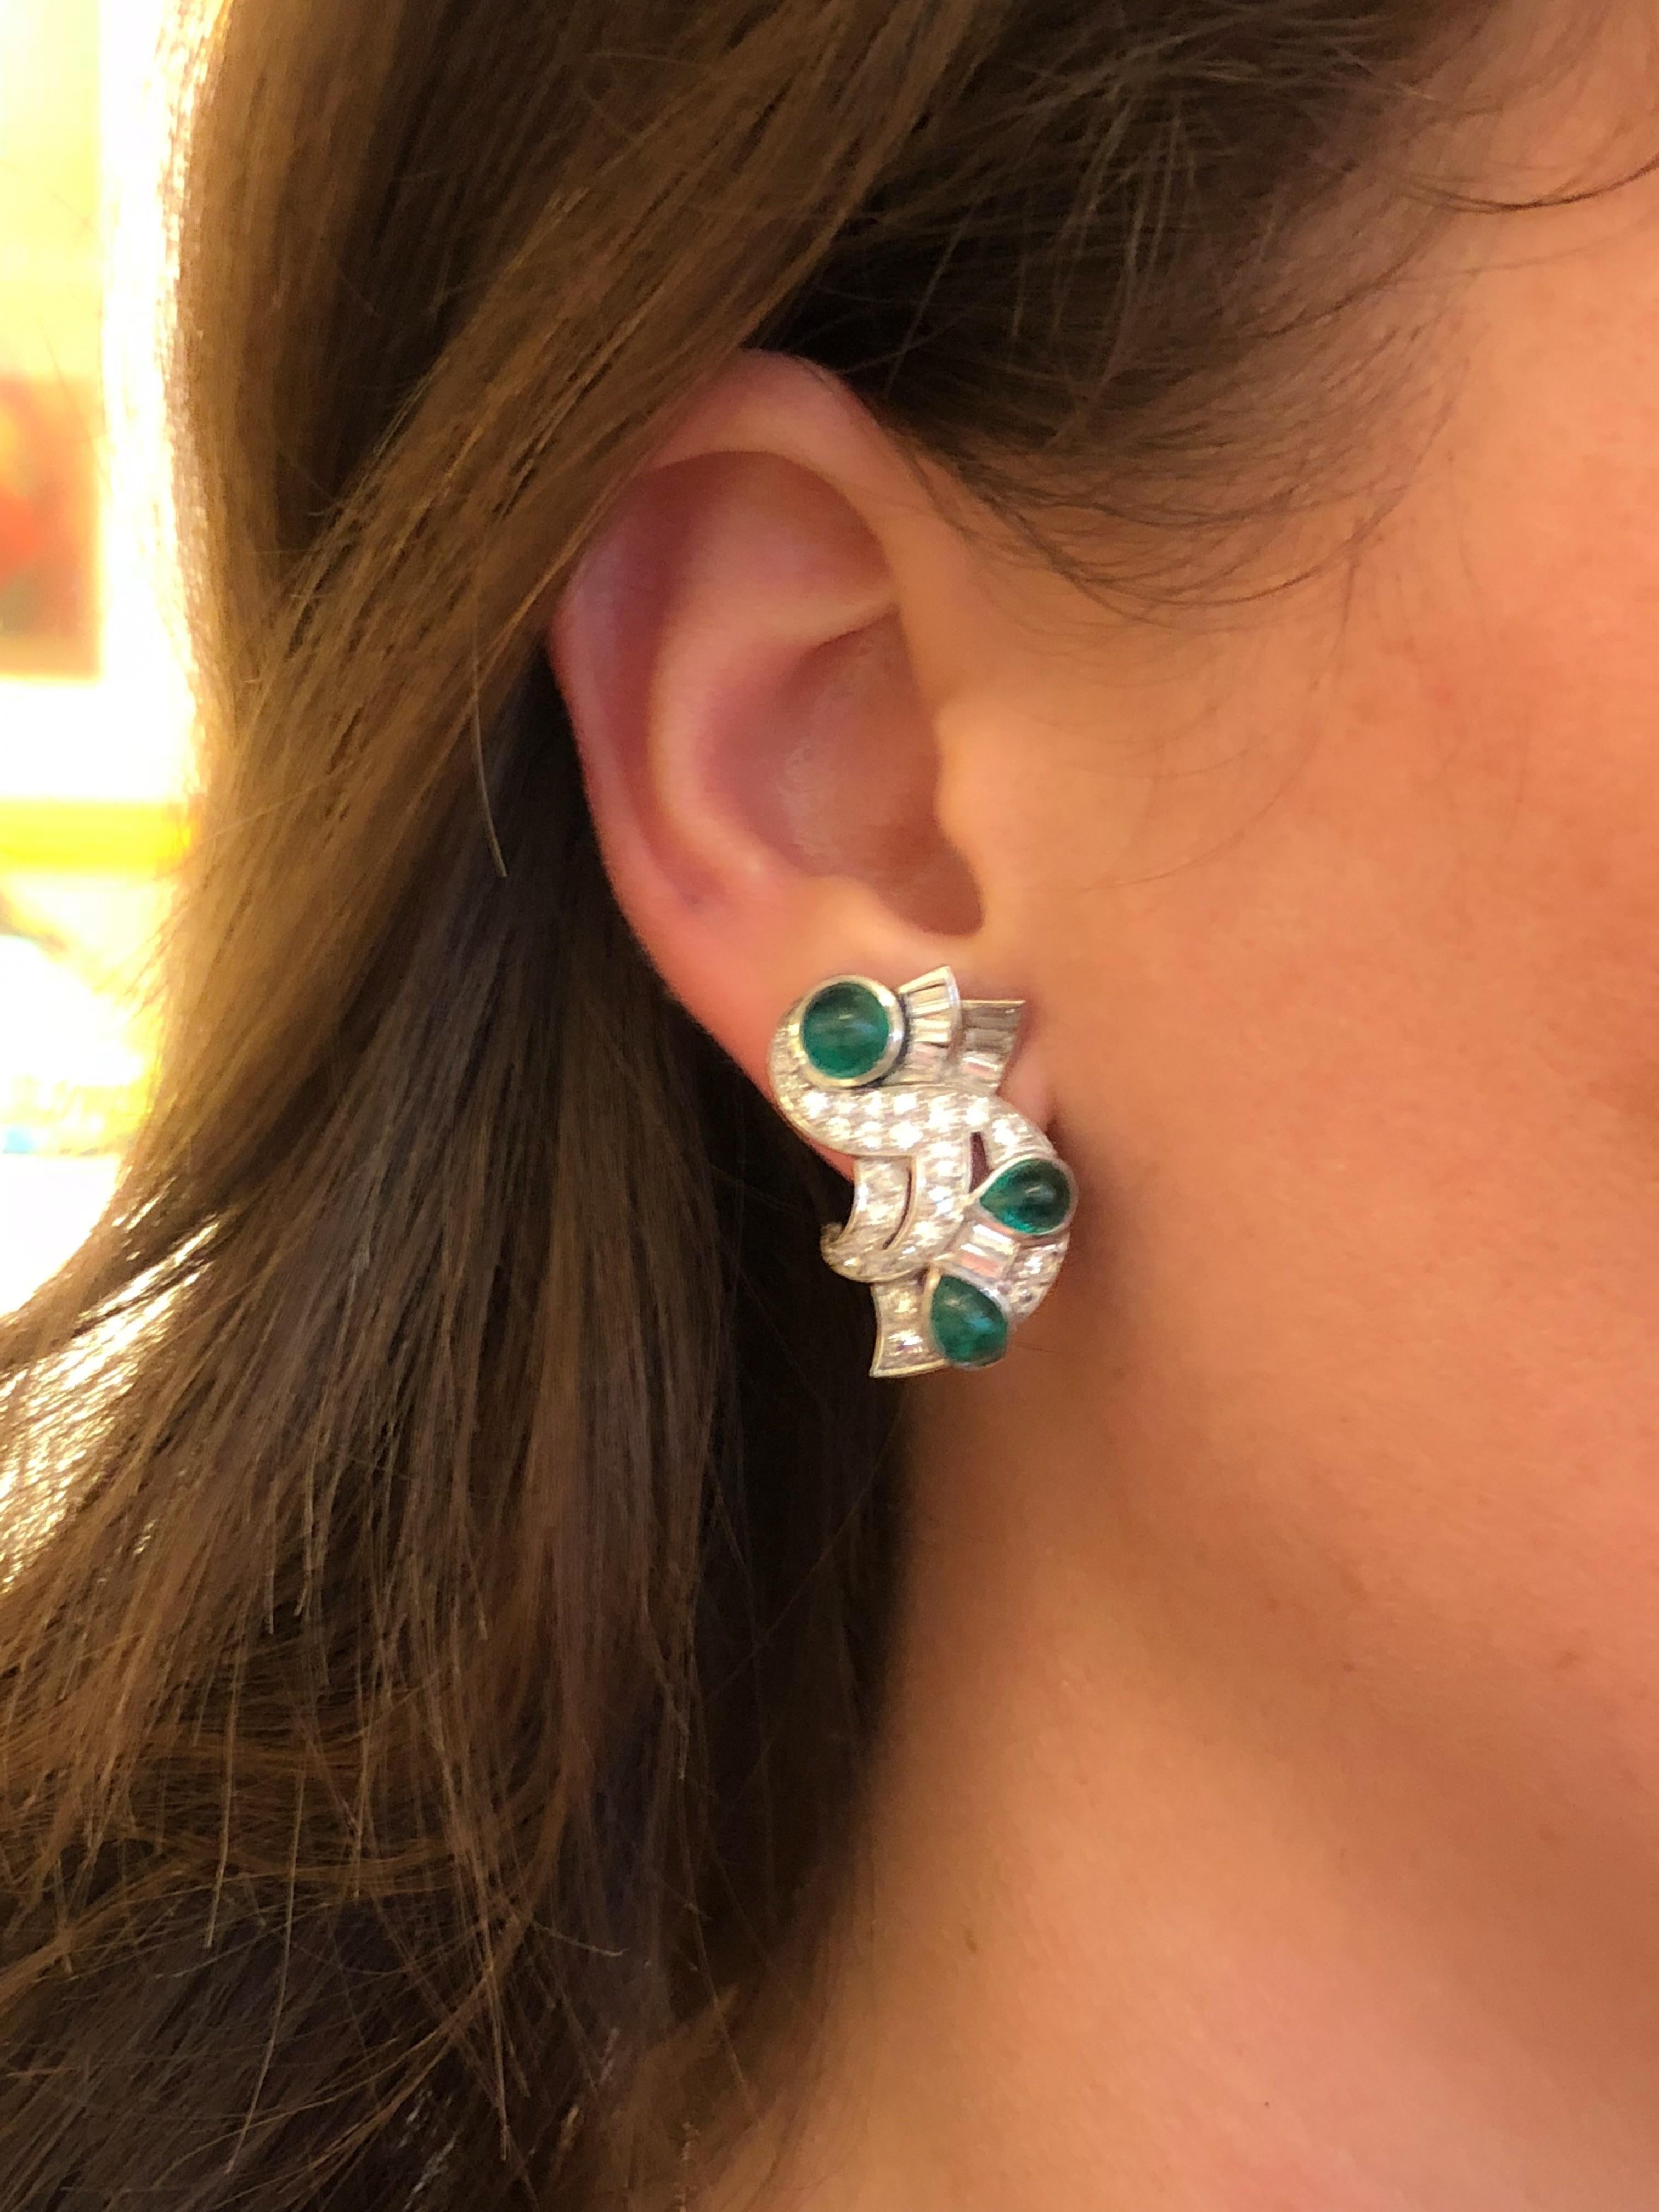 A pair of Retro platinum earrings with diamonds and emeralds. The earrings have 50 round-cut diamonds with an approximate total weight of 2.70 carats, and 16 baguette cut diamonds with an approximate total weight of 1.60 carats. The total